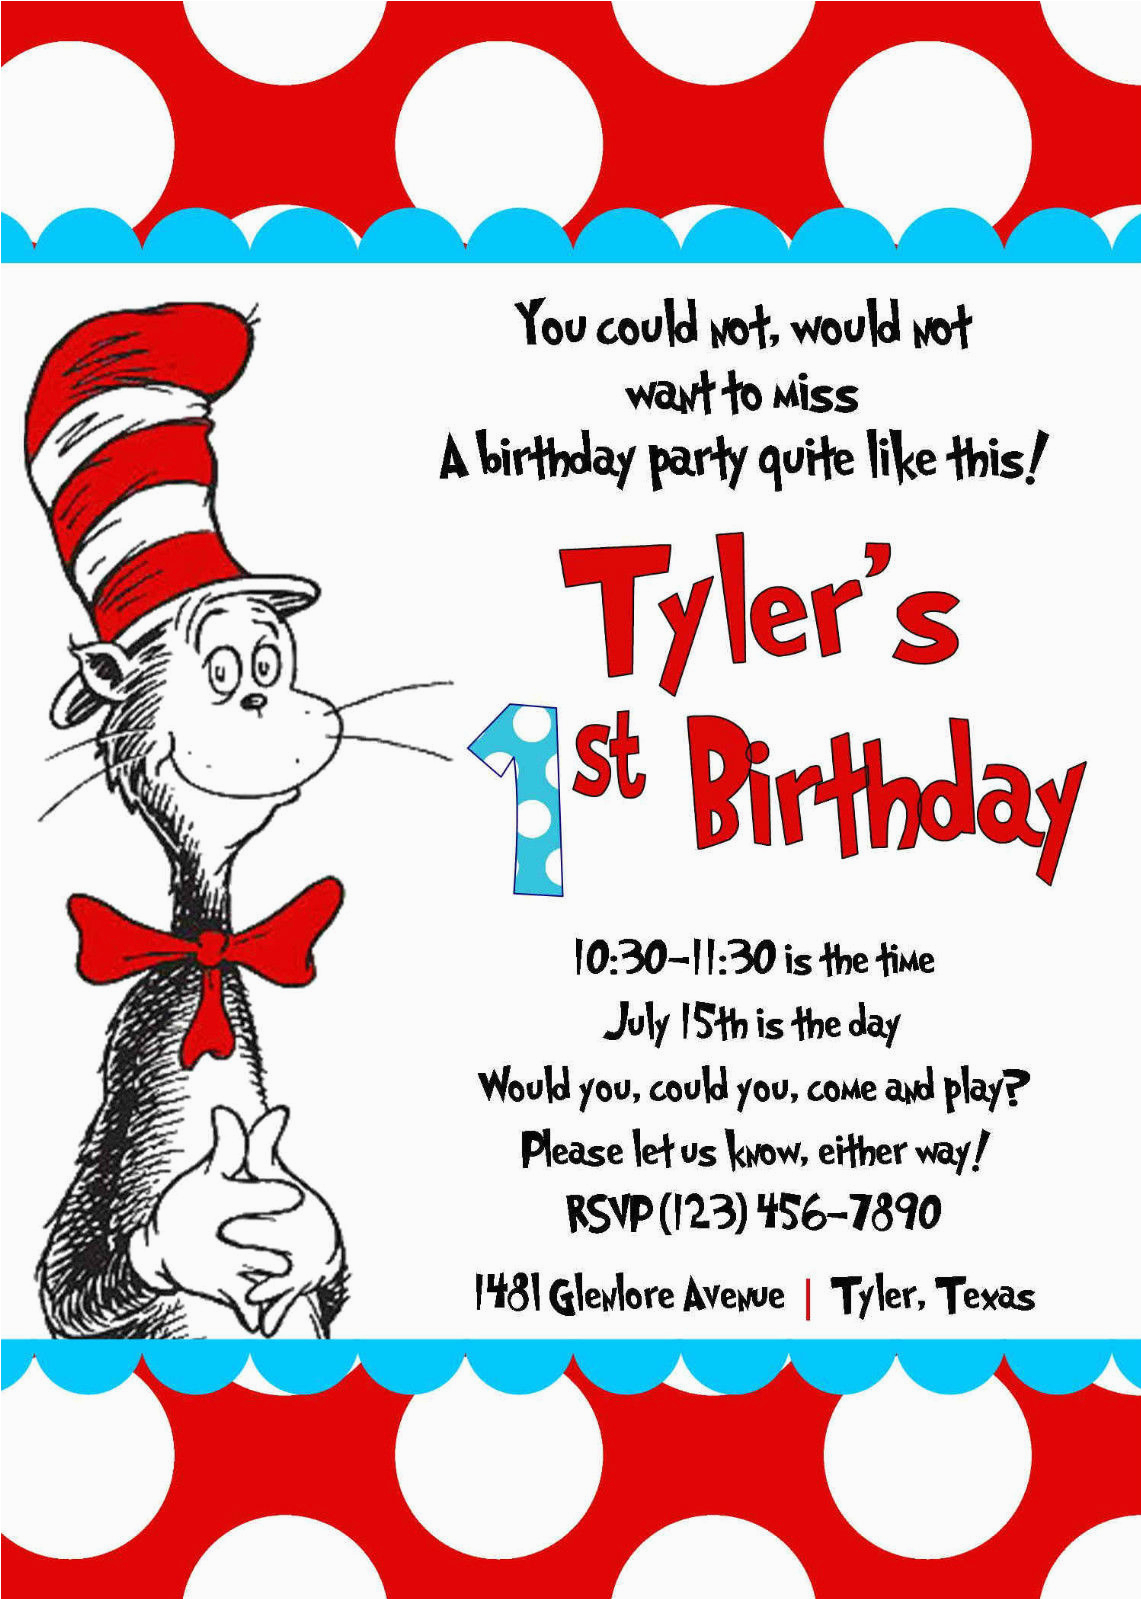 Cat In the Hat Birthday Party Invitations Free Printable Cat In the Hat Birthday Party Invitations